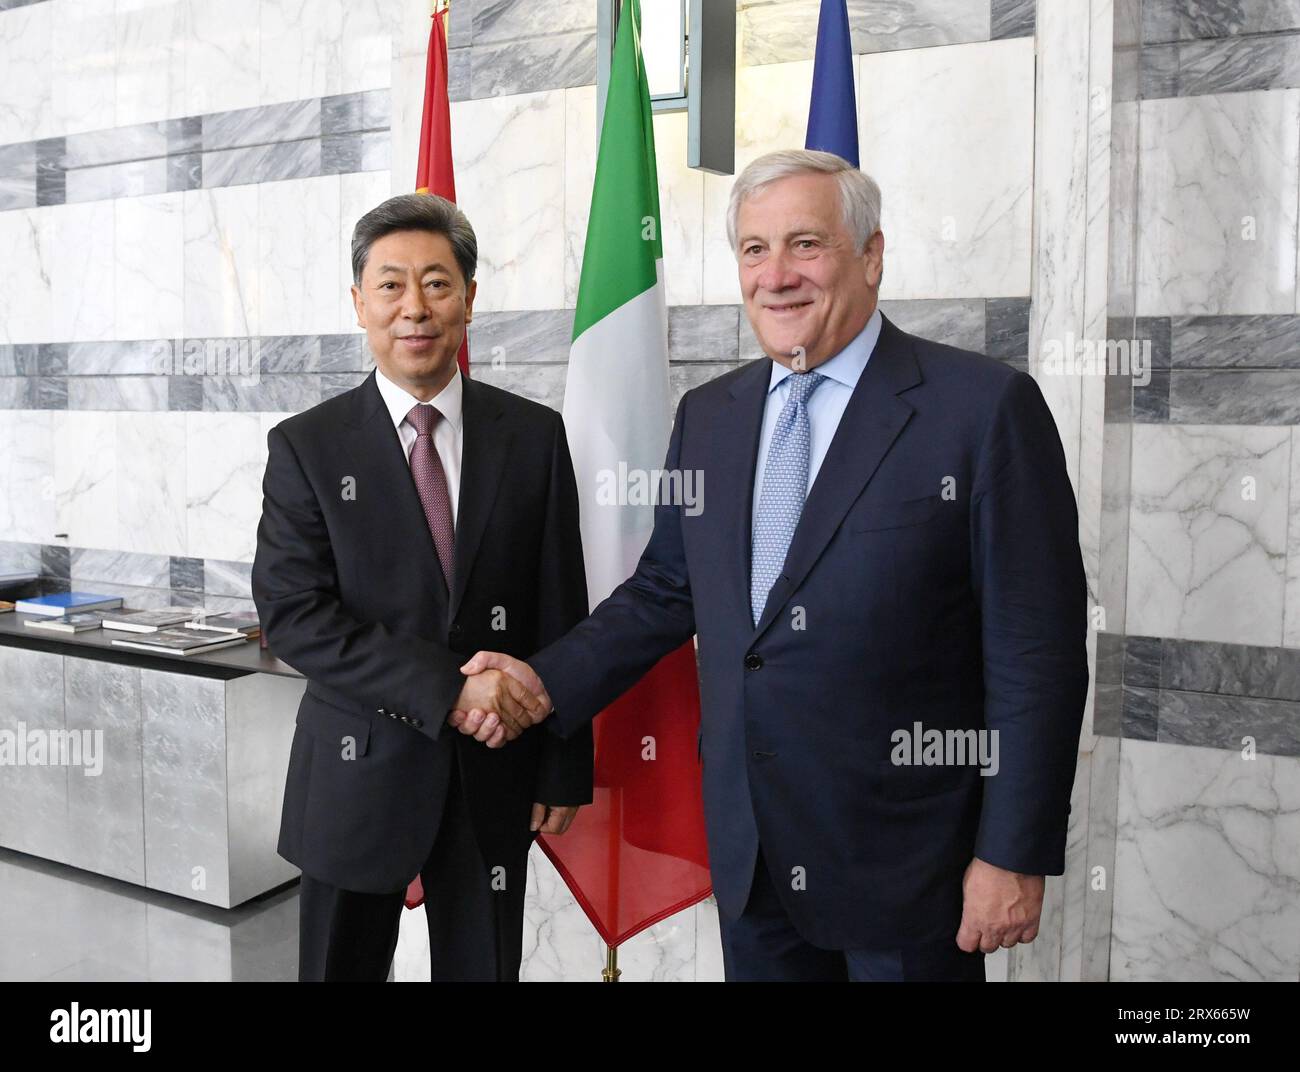 Rome, Italy. 22nd Sep, 2023. Chen Wenqing, a member of the Political Bureau of the Communist Party of China (CPC) Central Committee and head of the Commission for Political and Legal Affairs of the CPC Central Committee, meets with Italian Deputy Prime Minister and Minister of Foreign Affairs Antonio Tajani in Rome, Italy, Sept. 22, 2023. Credit: Jin Mamengni/Xinhua/Alamy Live News Stock Photo